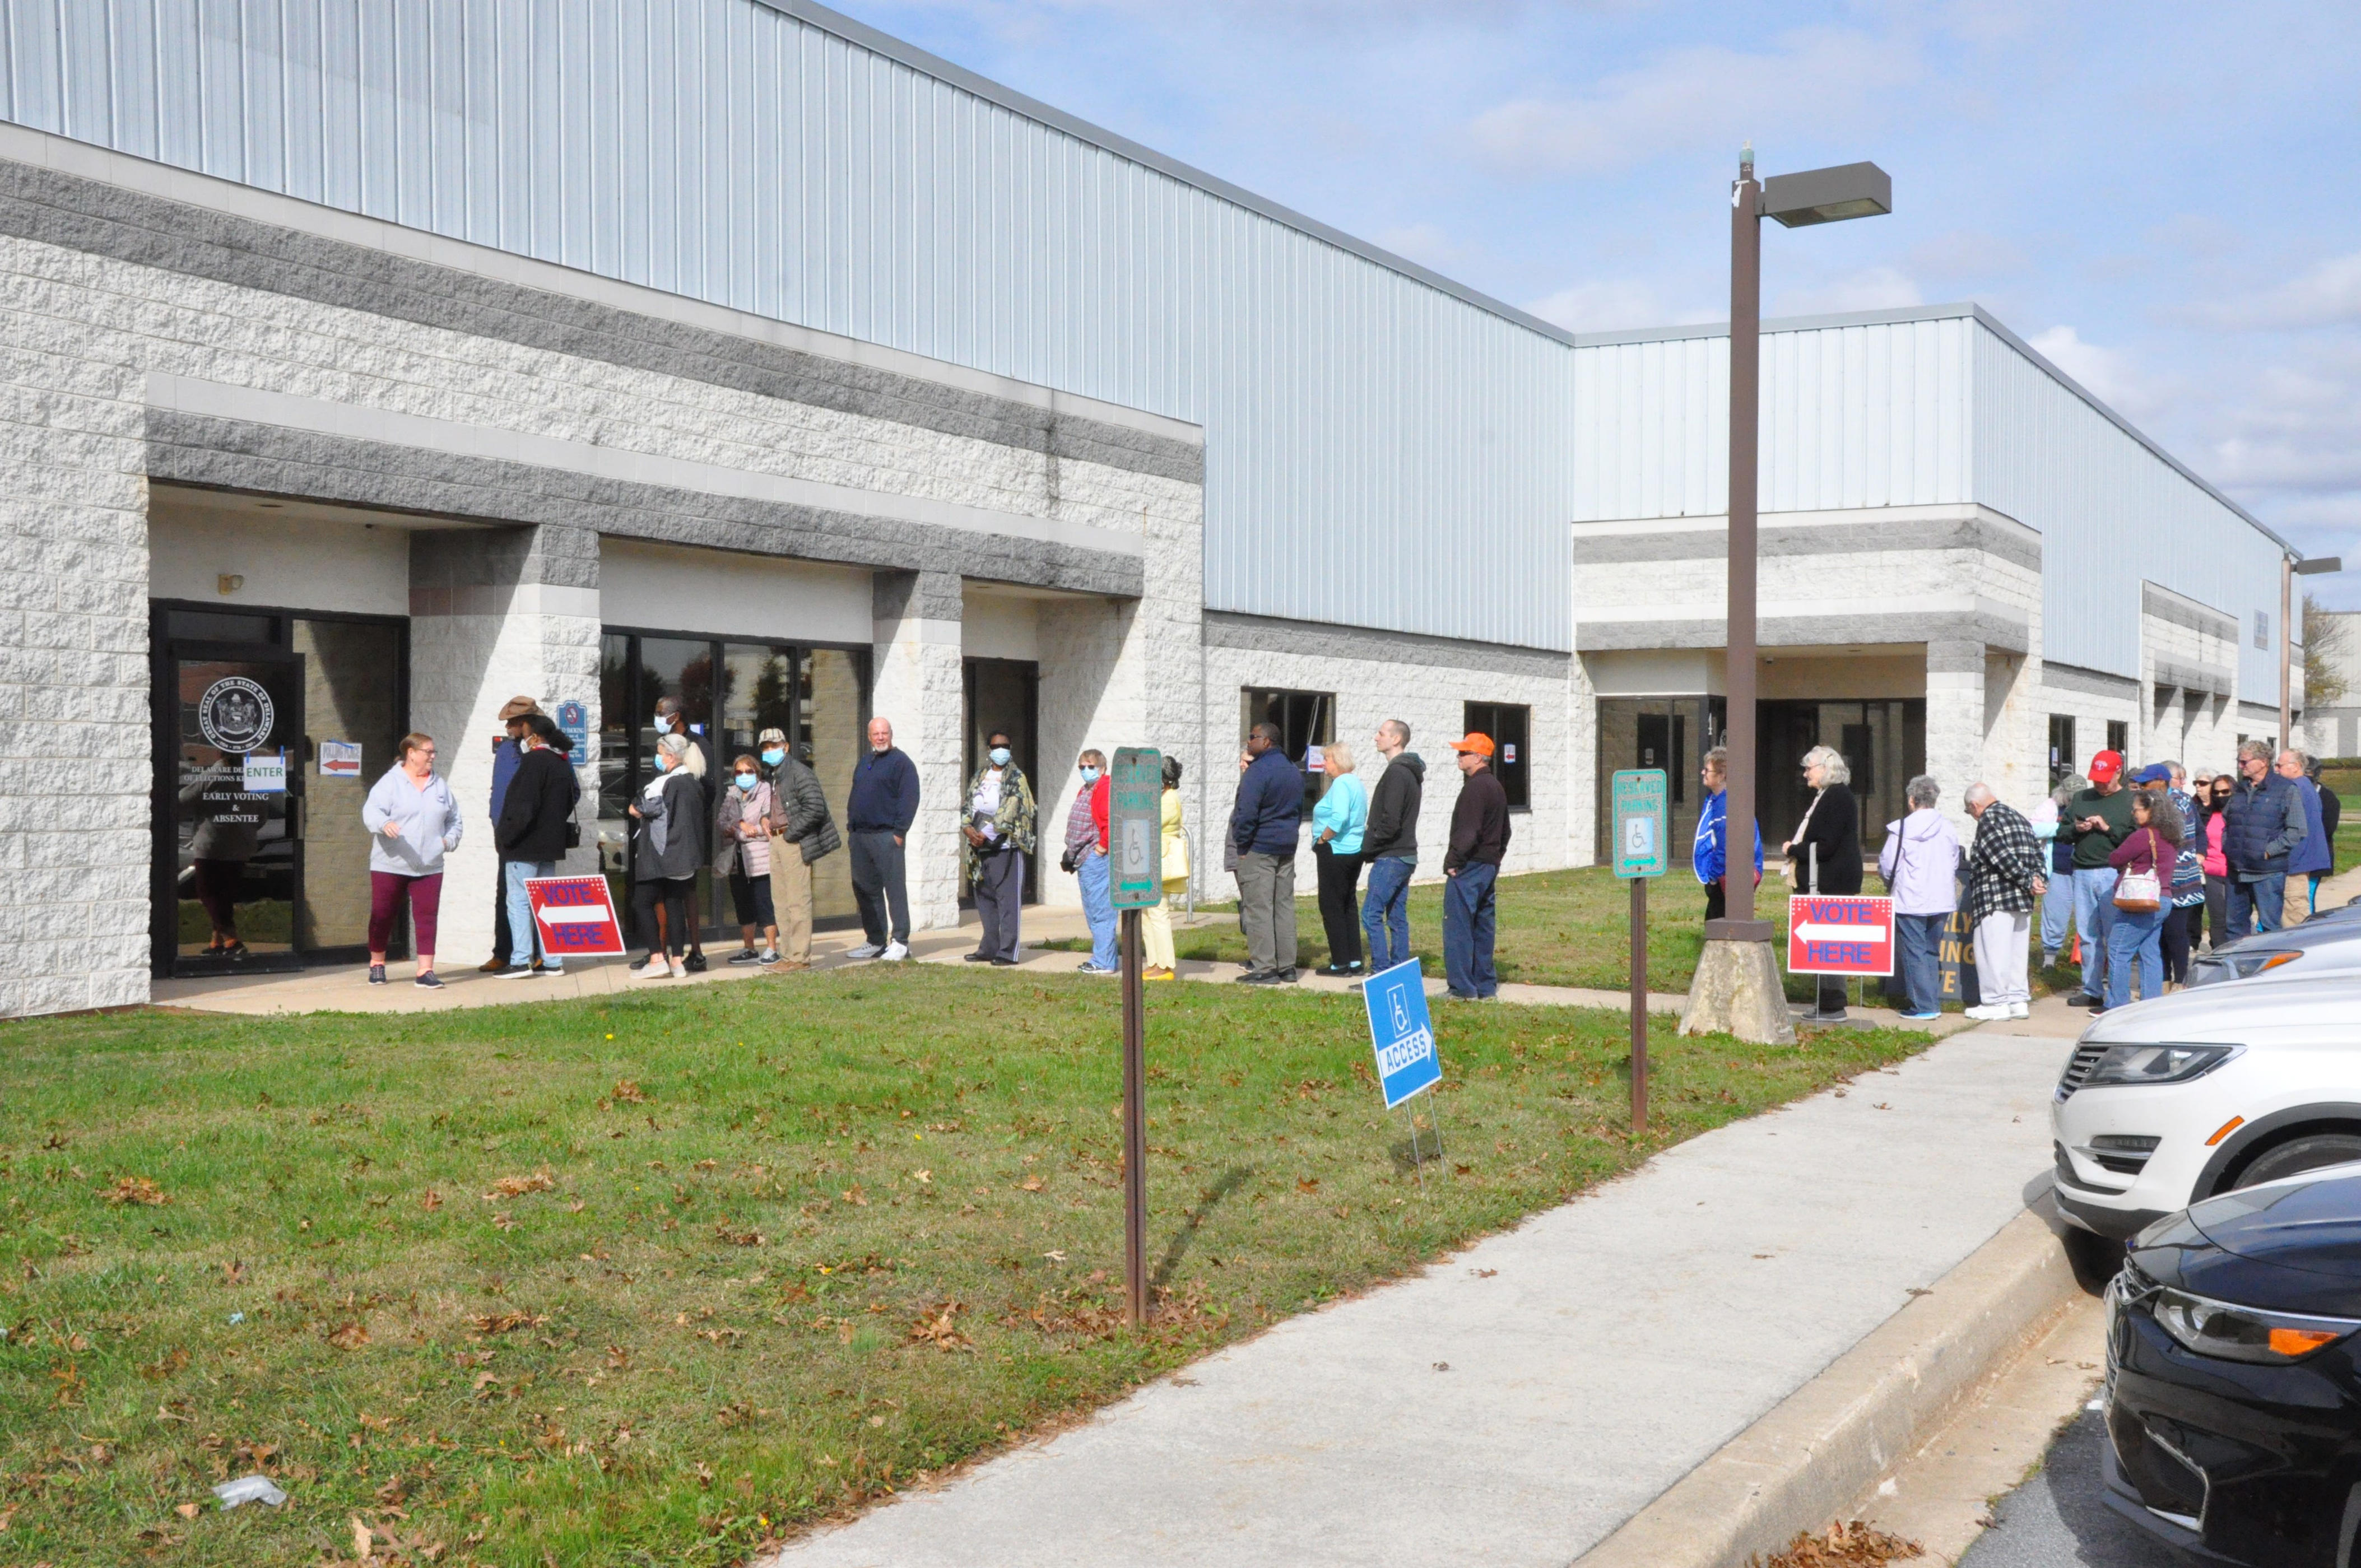 delaware superior court finds early voting and permanent absentee voting unconstitutional